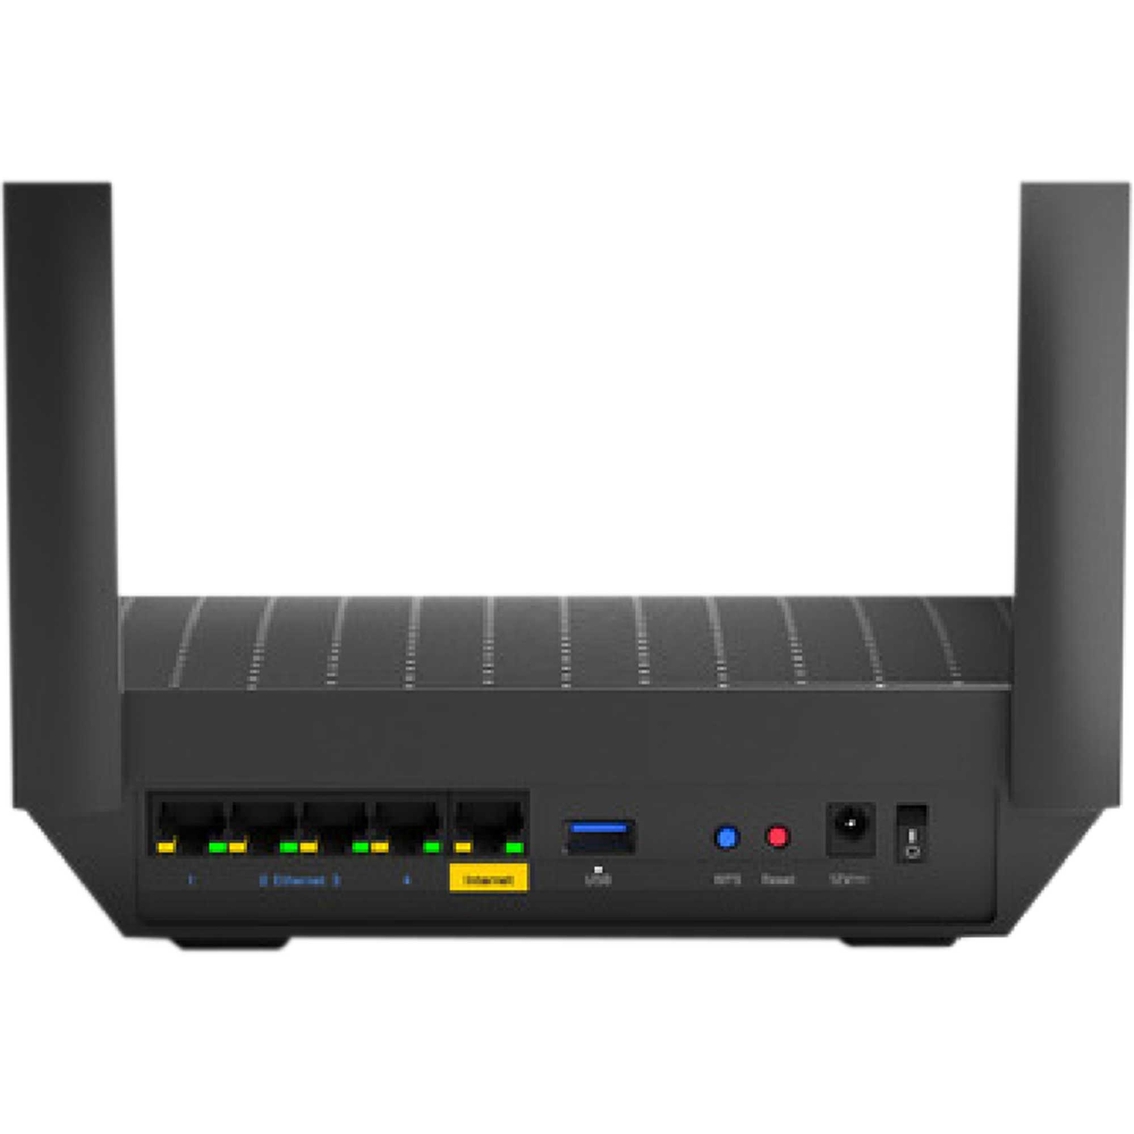 Linksys Max Stream Mesh Wi-Fi 6 Router MR7350 - Image 3 of 8